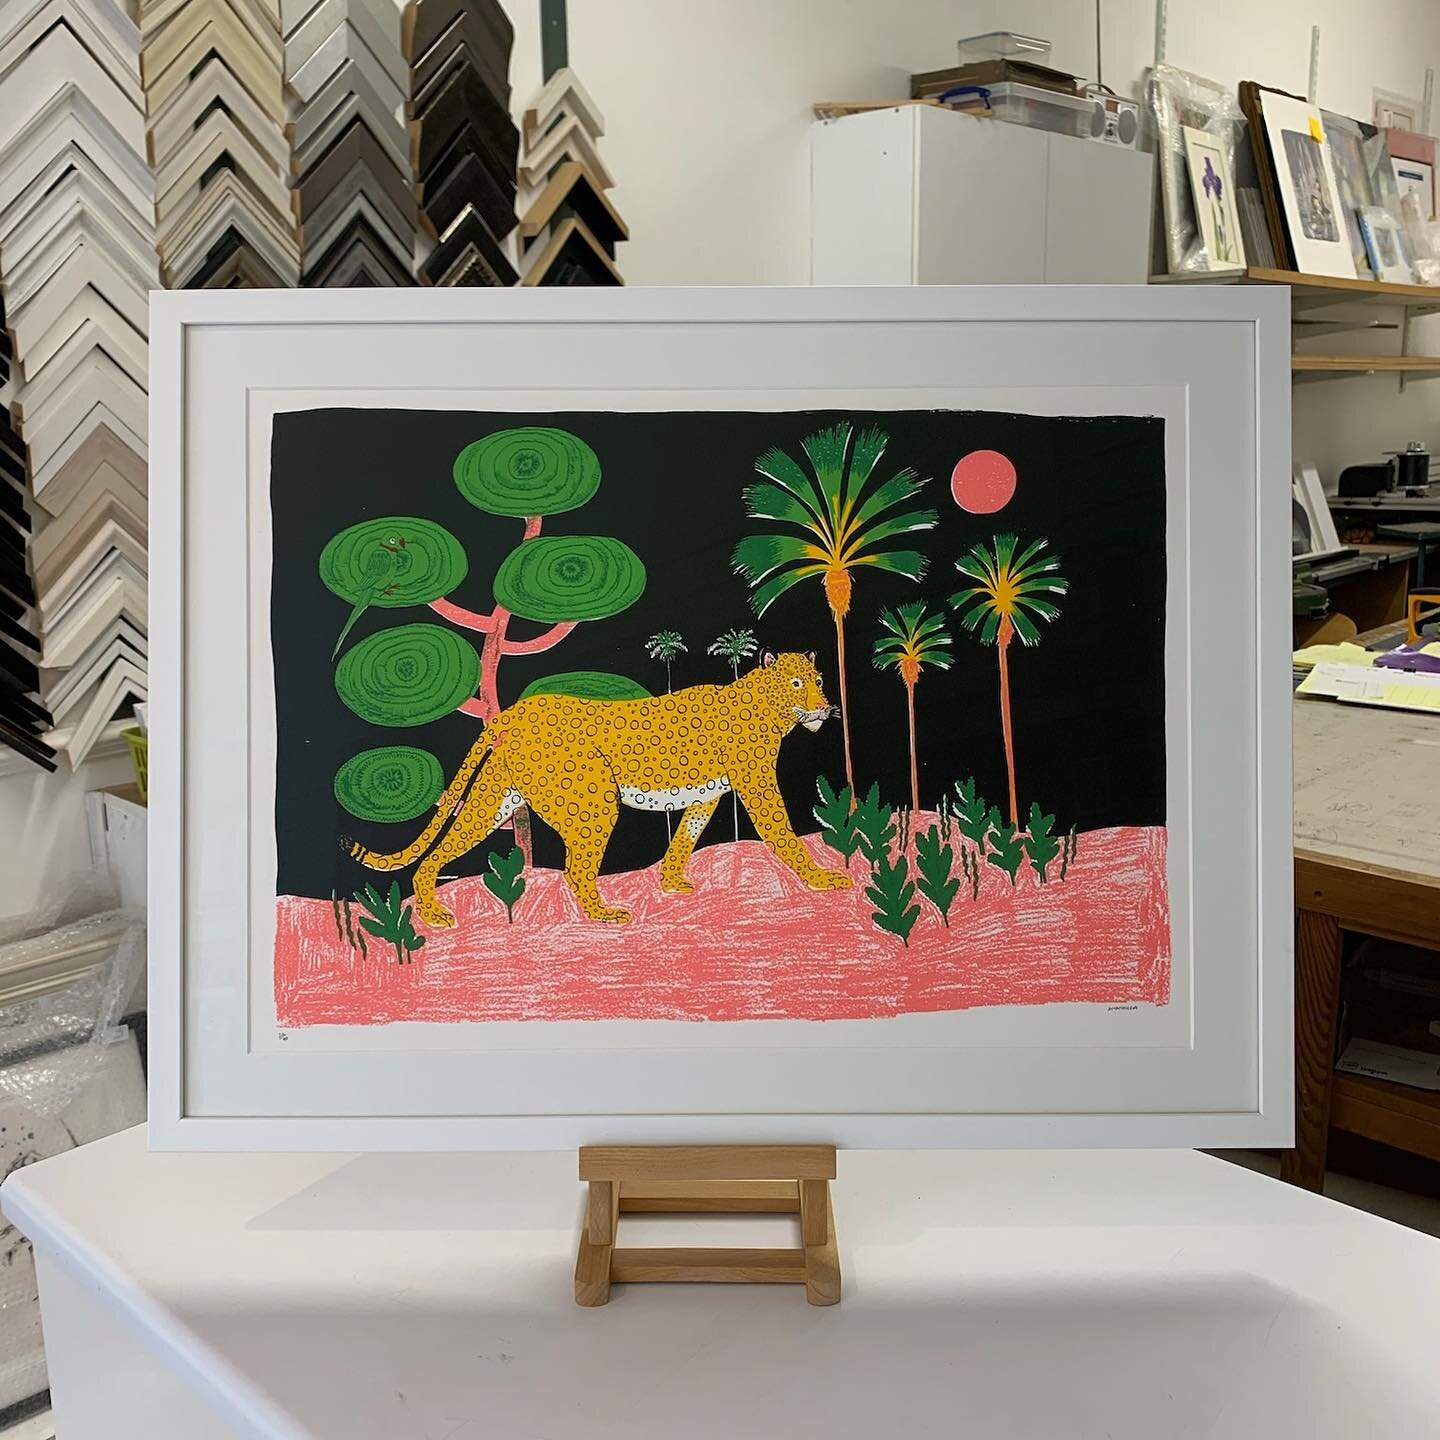 Welcome to the jungle! @printclublondon